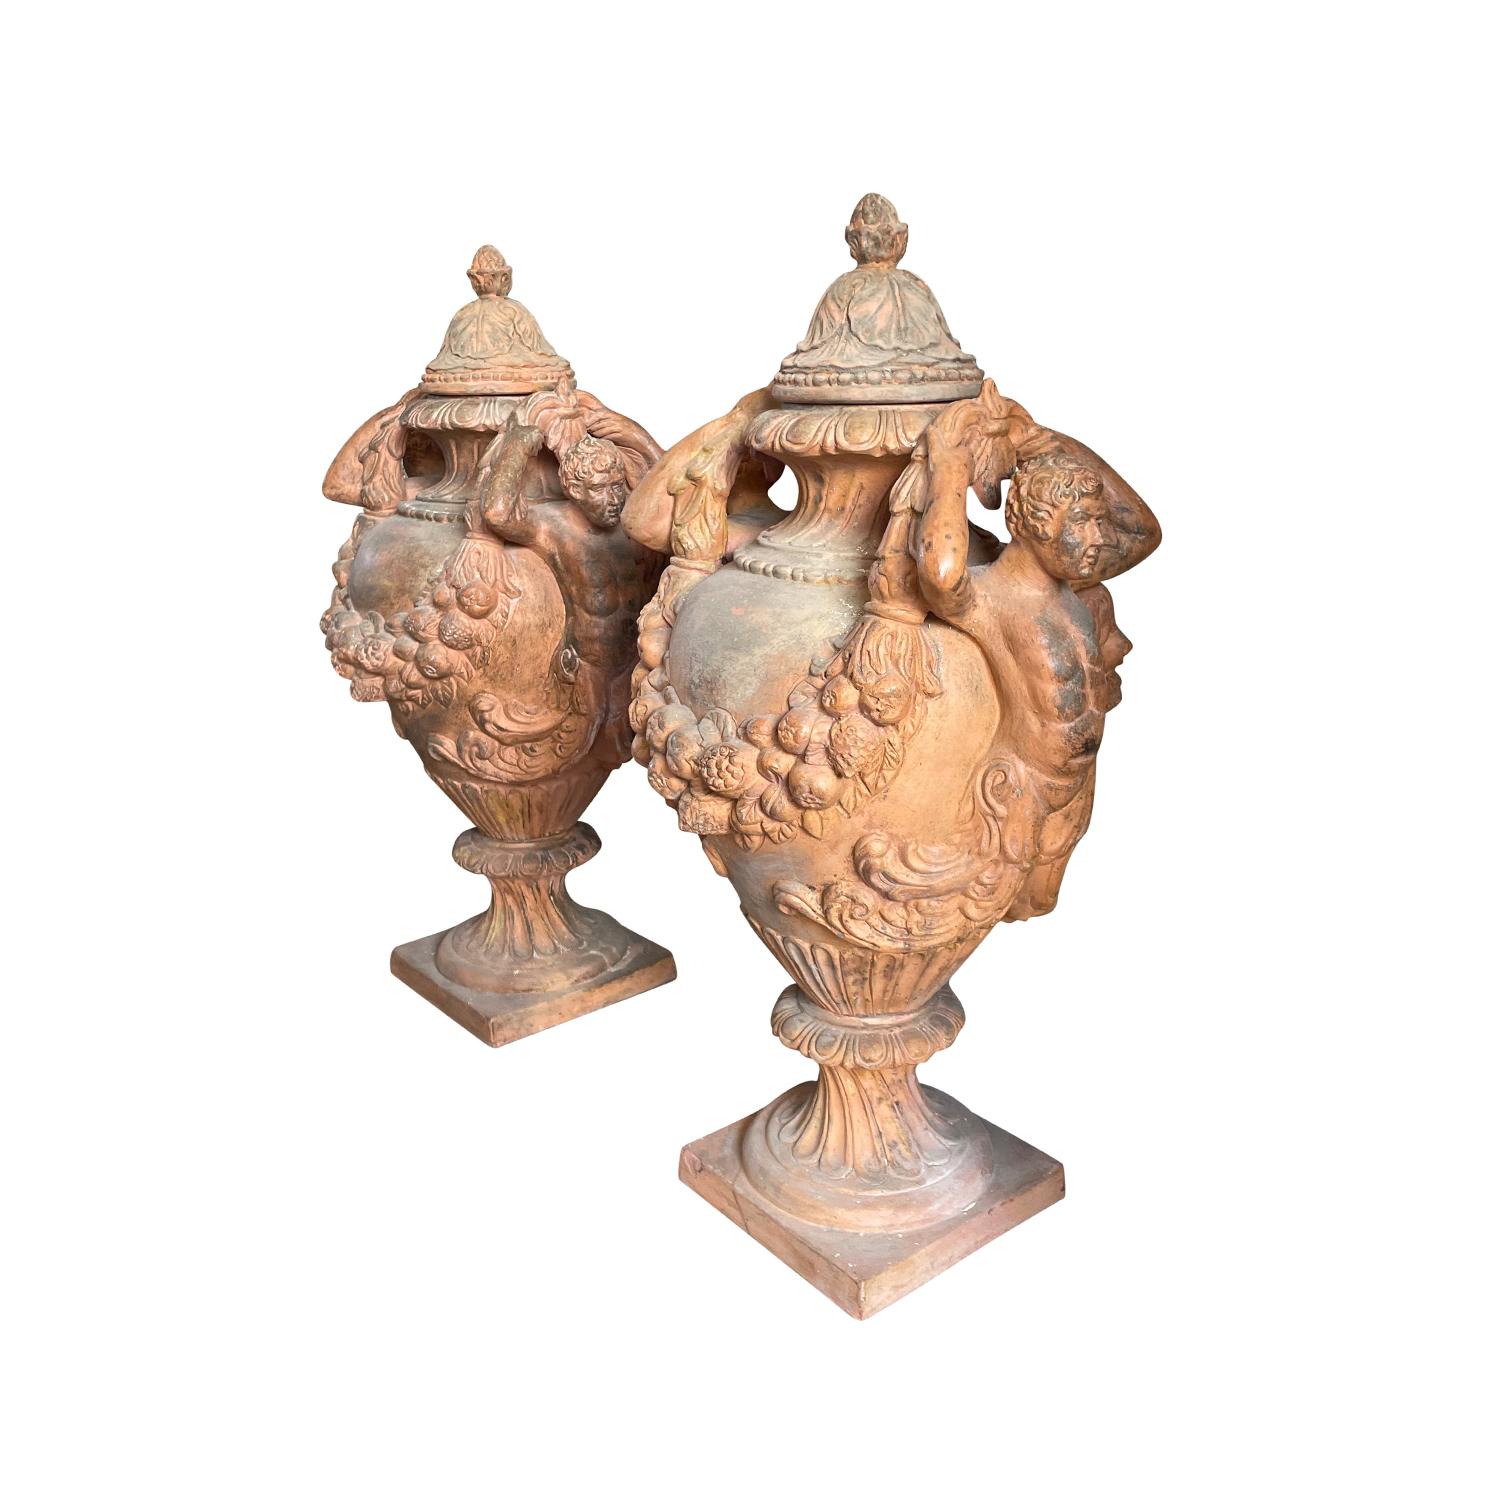 Hand-Crafted 19th Century Italian Antique Pair of Renaissance Style Terra Cotta Urns For Sale